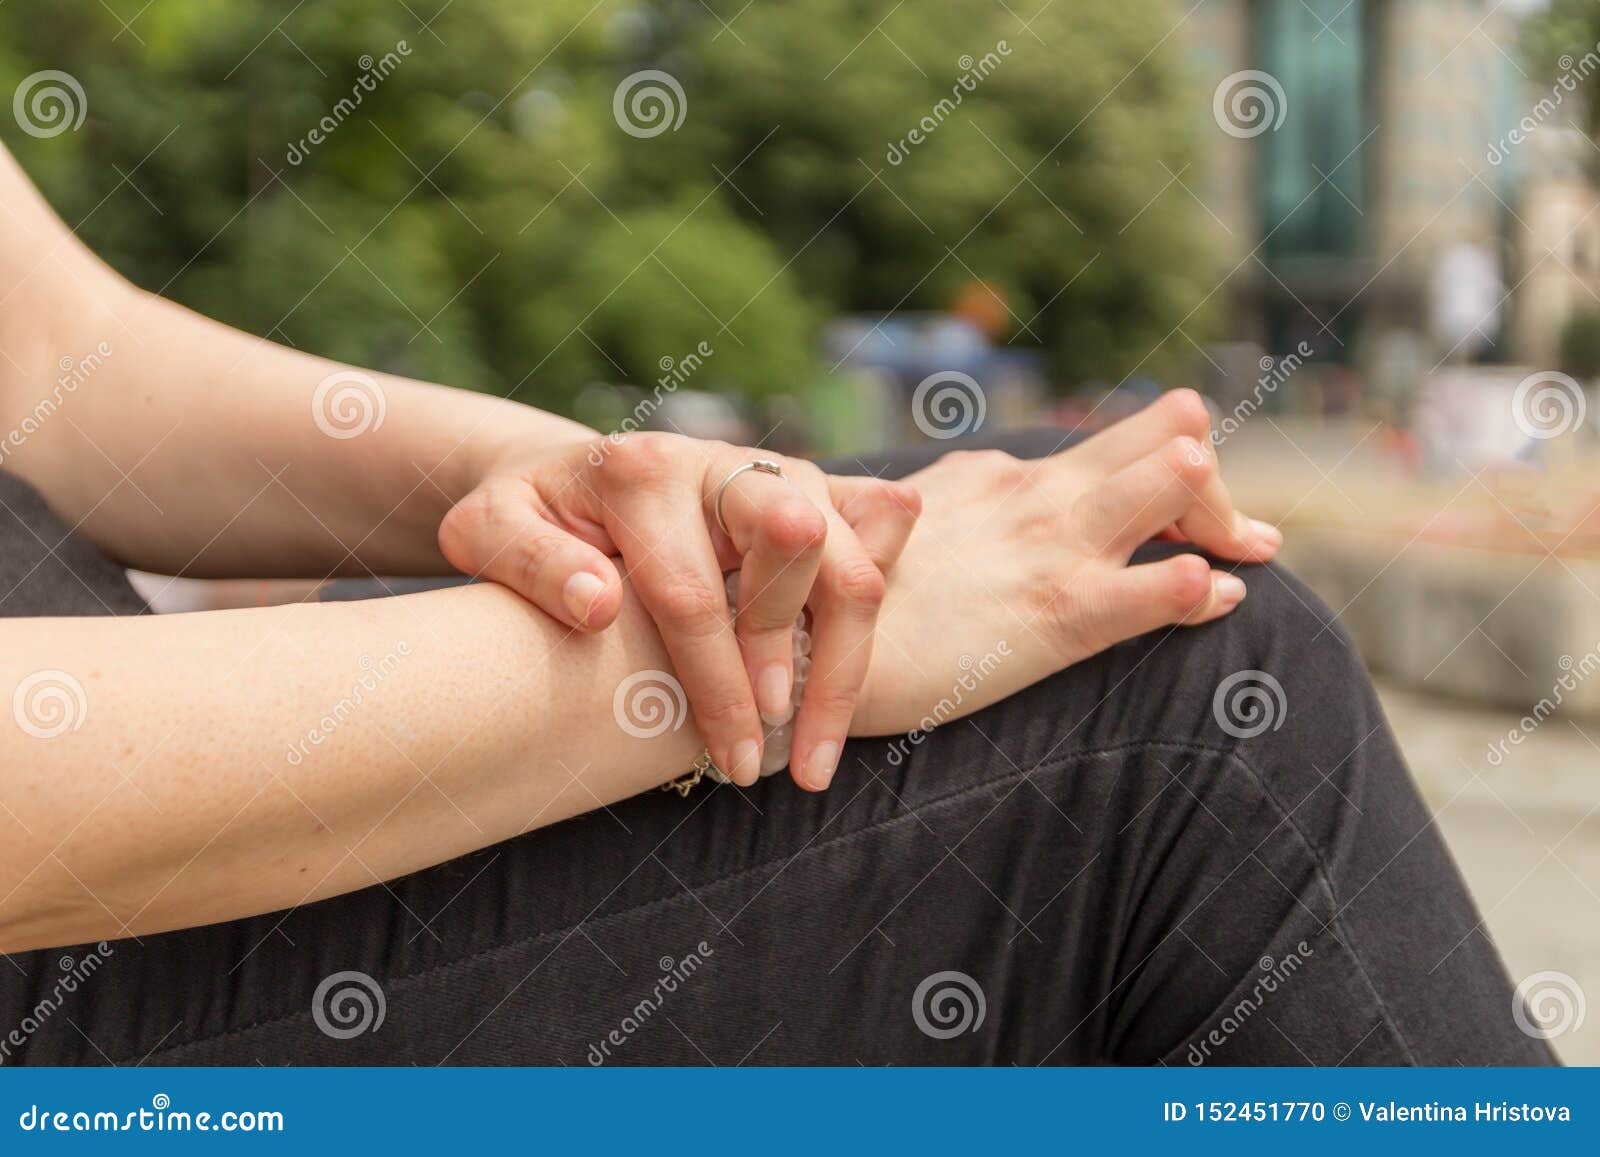 young woman having rheumatoid arthritis takes a rest sitting on a bench at a park. hands and legs are deformed. she feels pain.